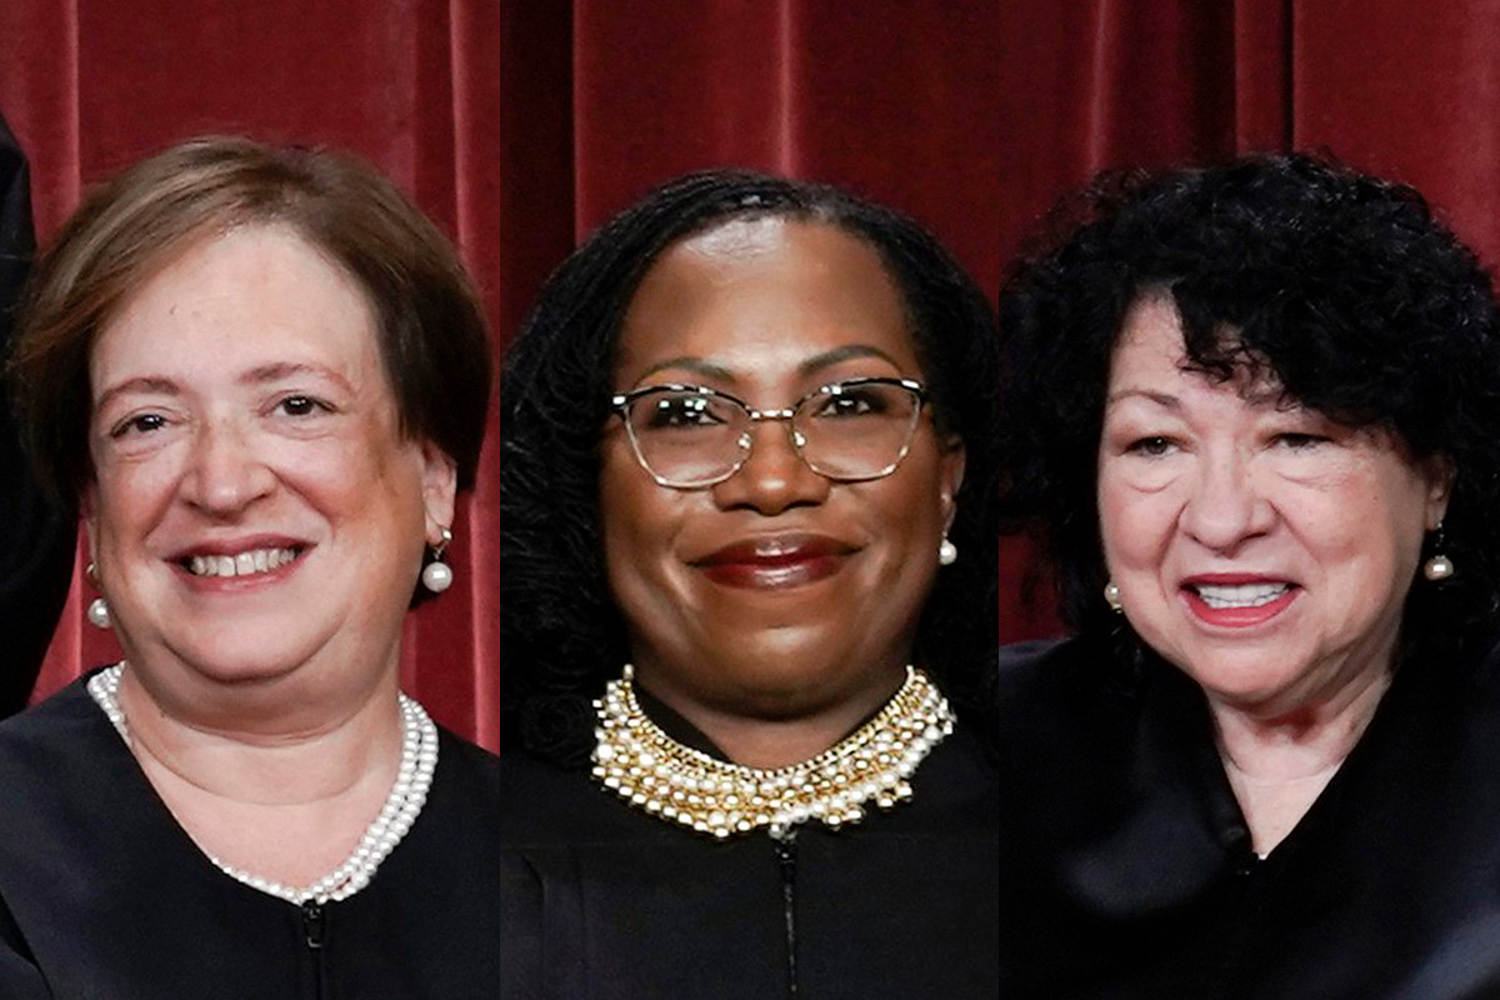 Liberal justices raise alarm about Supreme Court's weakening of federal agency power